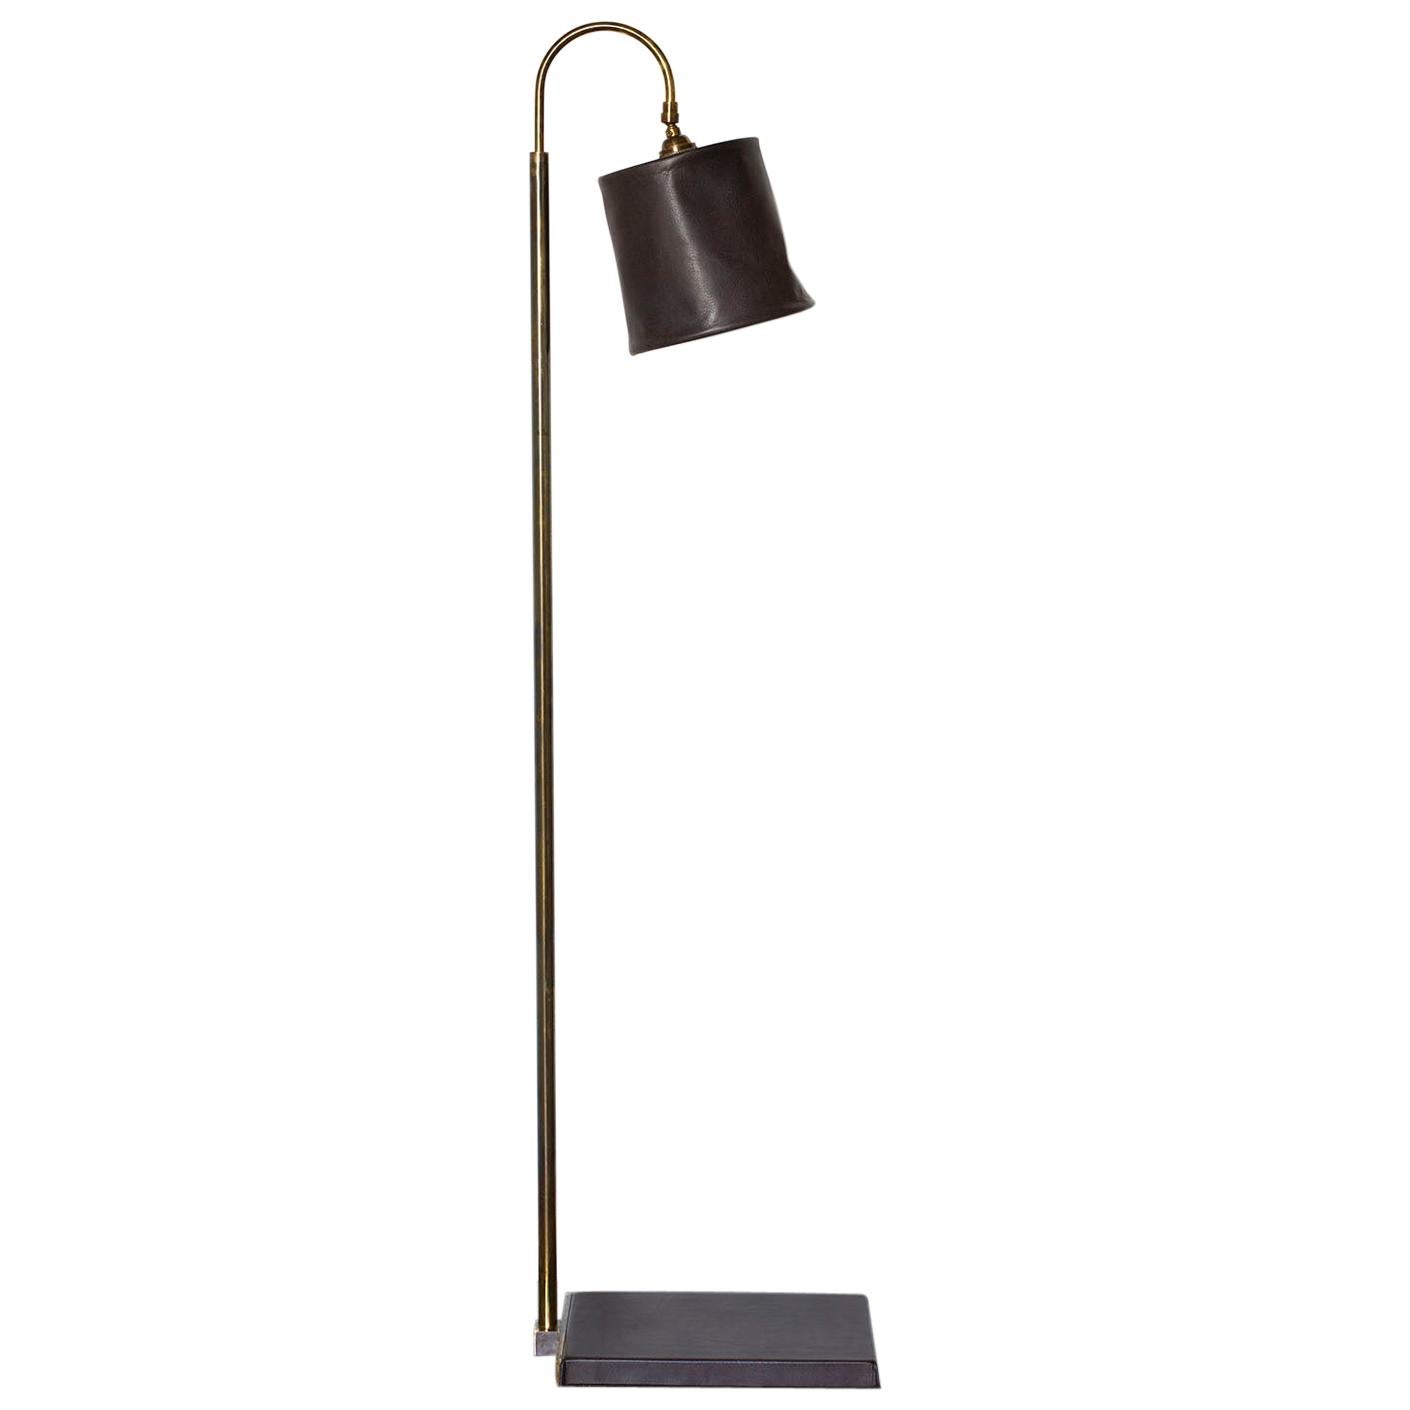 Series01 Floor Lamp, Hand-Dyed Sable Brown Leather, Smoke Patinated Brass For Sale